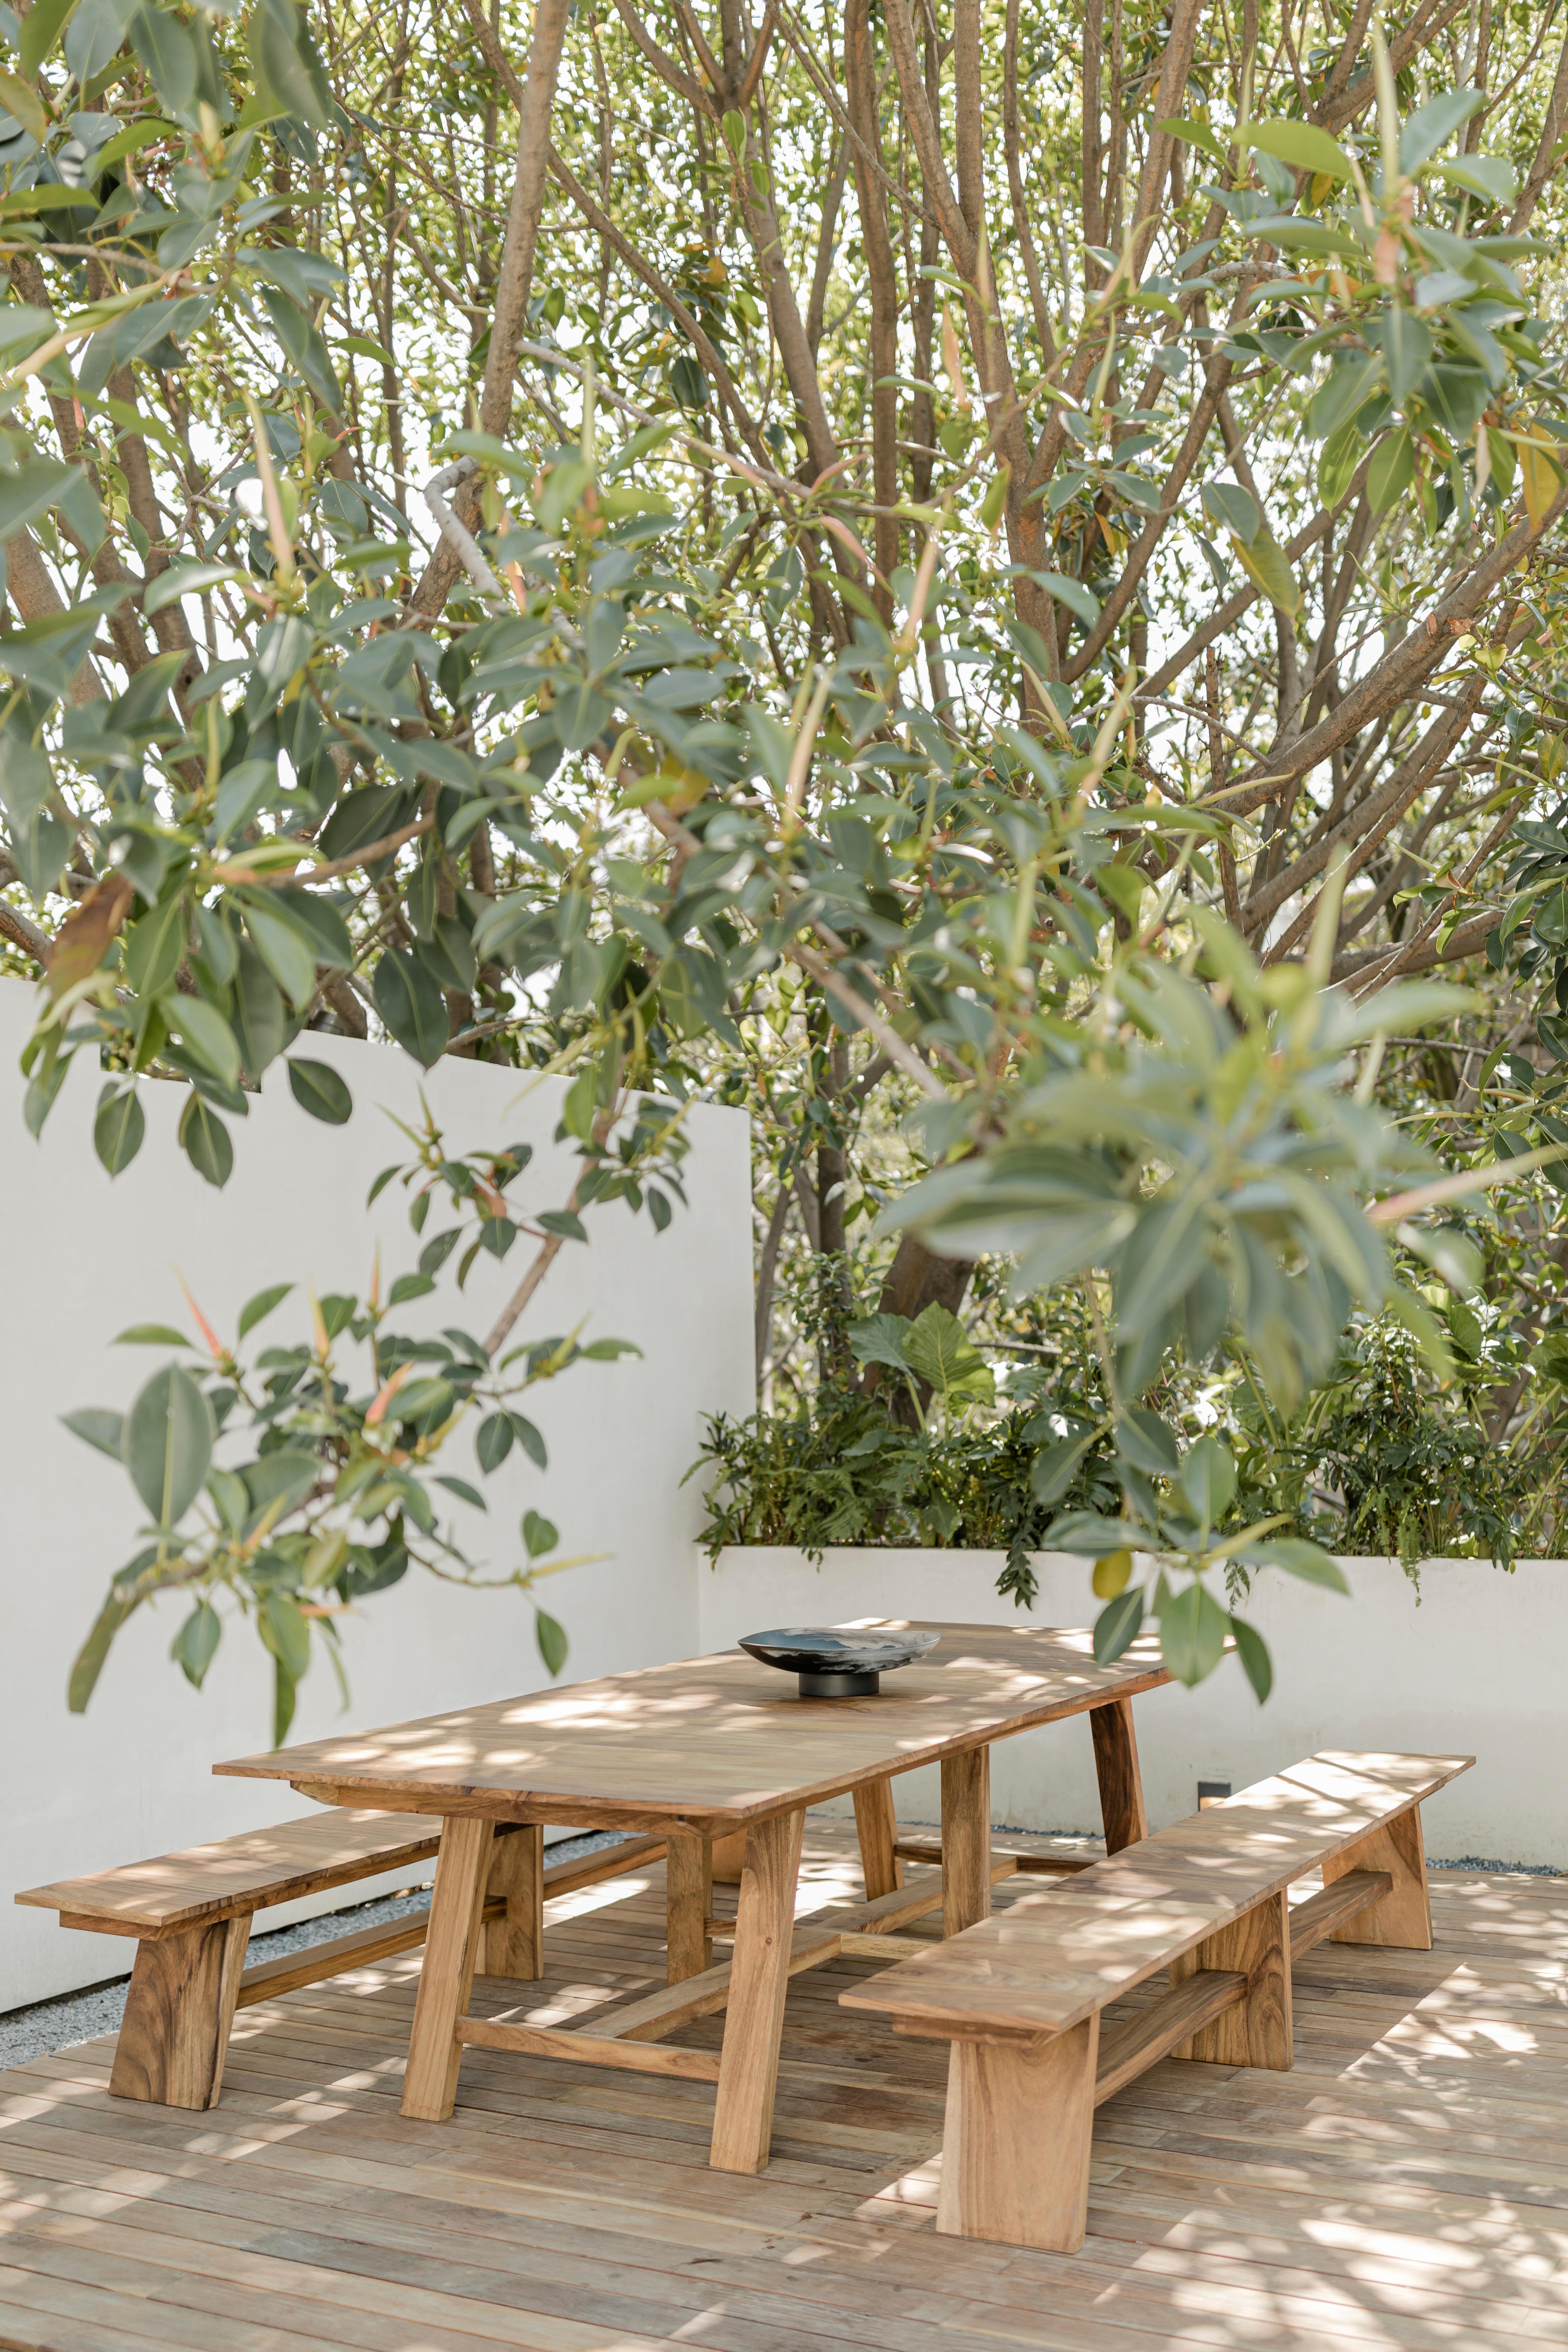 The Playamar Dining Bench is inspired by ingenious and rural furniture, with the aim of enjoying life outdoors.

Production time: 8-10 weeks for items without marble / 13-14 weeks for marble pieces. Shipping +10 additional business days. Casa